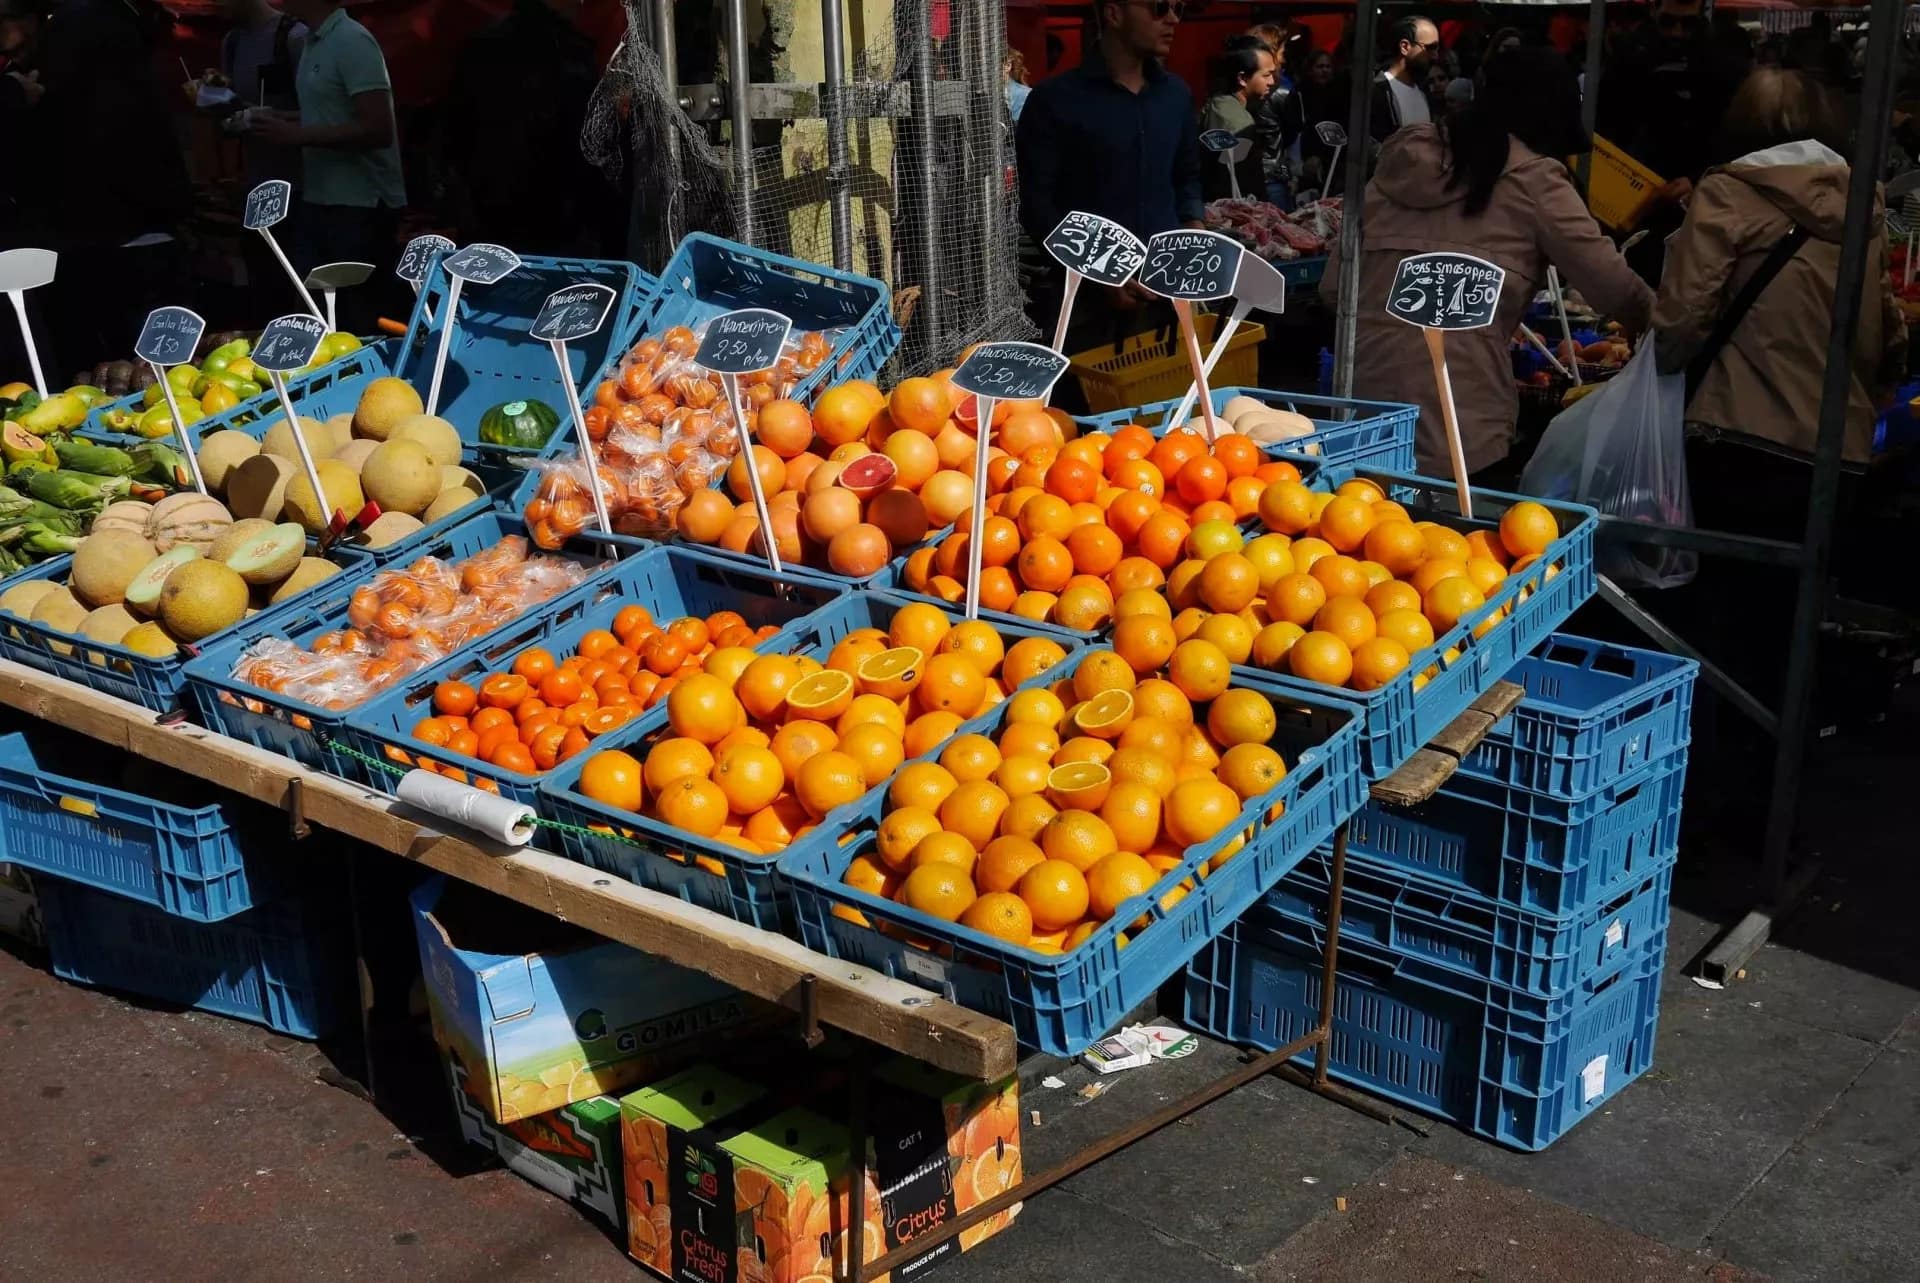 Image of a fruit stand selling a variety of oranges